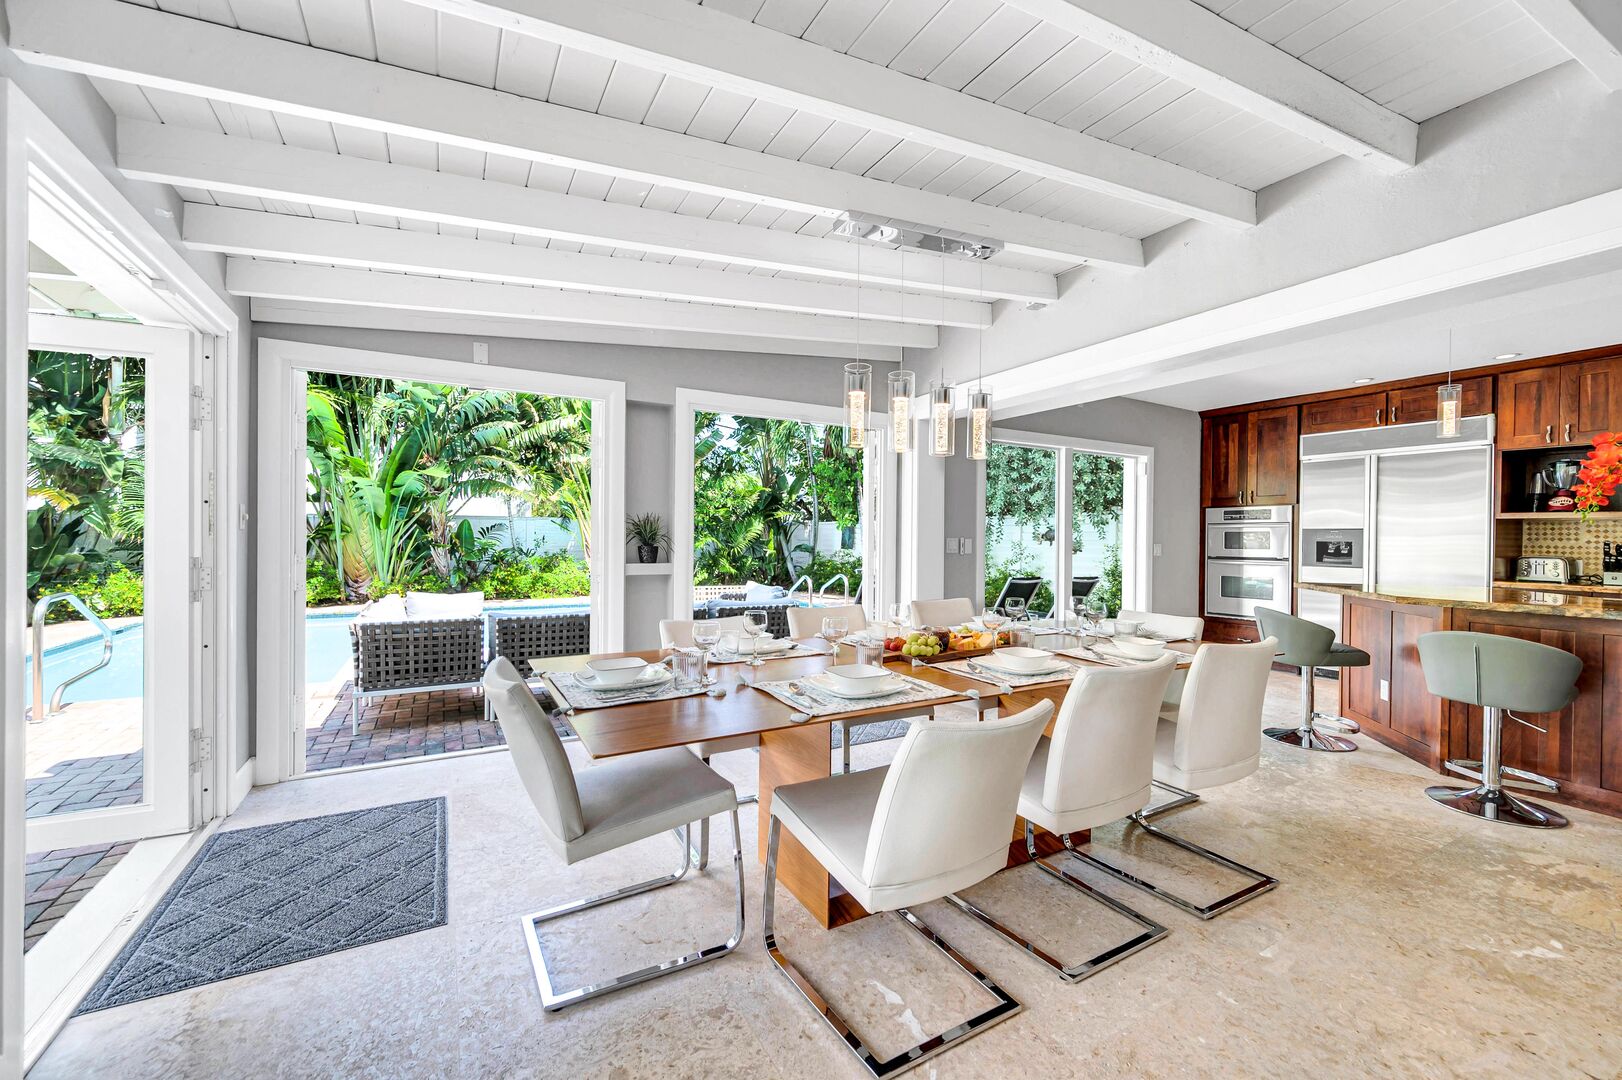 The dining room with its floor to ceiling windows offers pool views while letting in the year-round Florida sun.